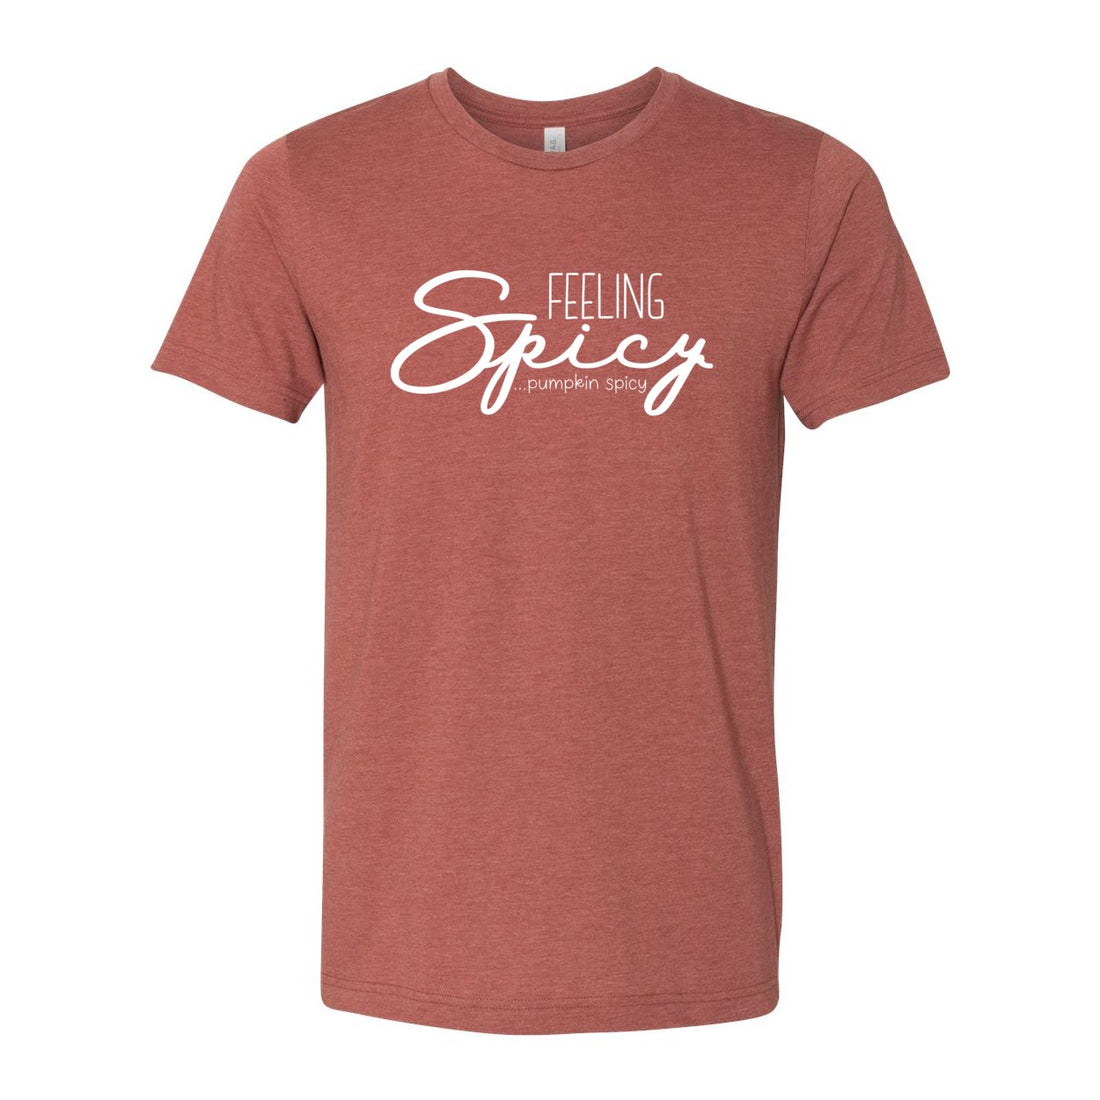 Feeling Spicy - T-Shirts - Positively Sassy - Feeling Spicy